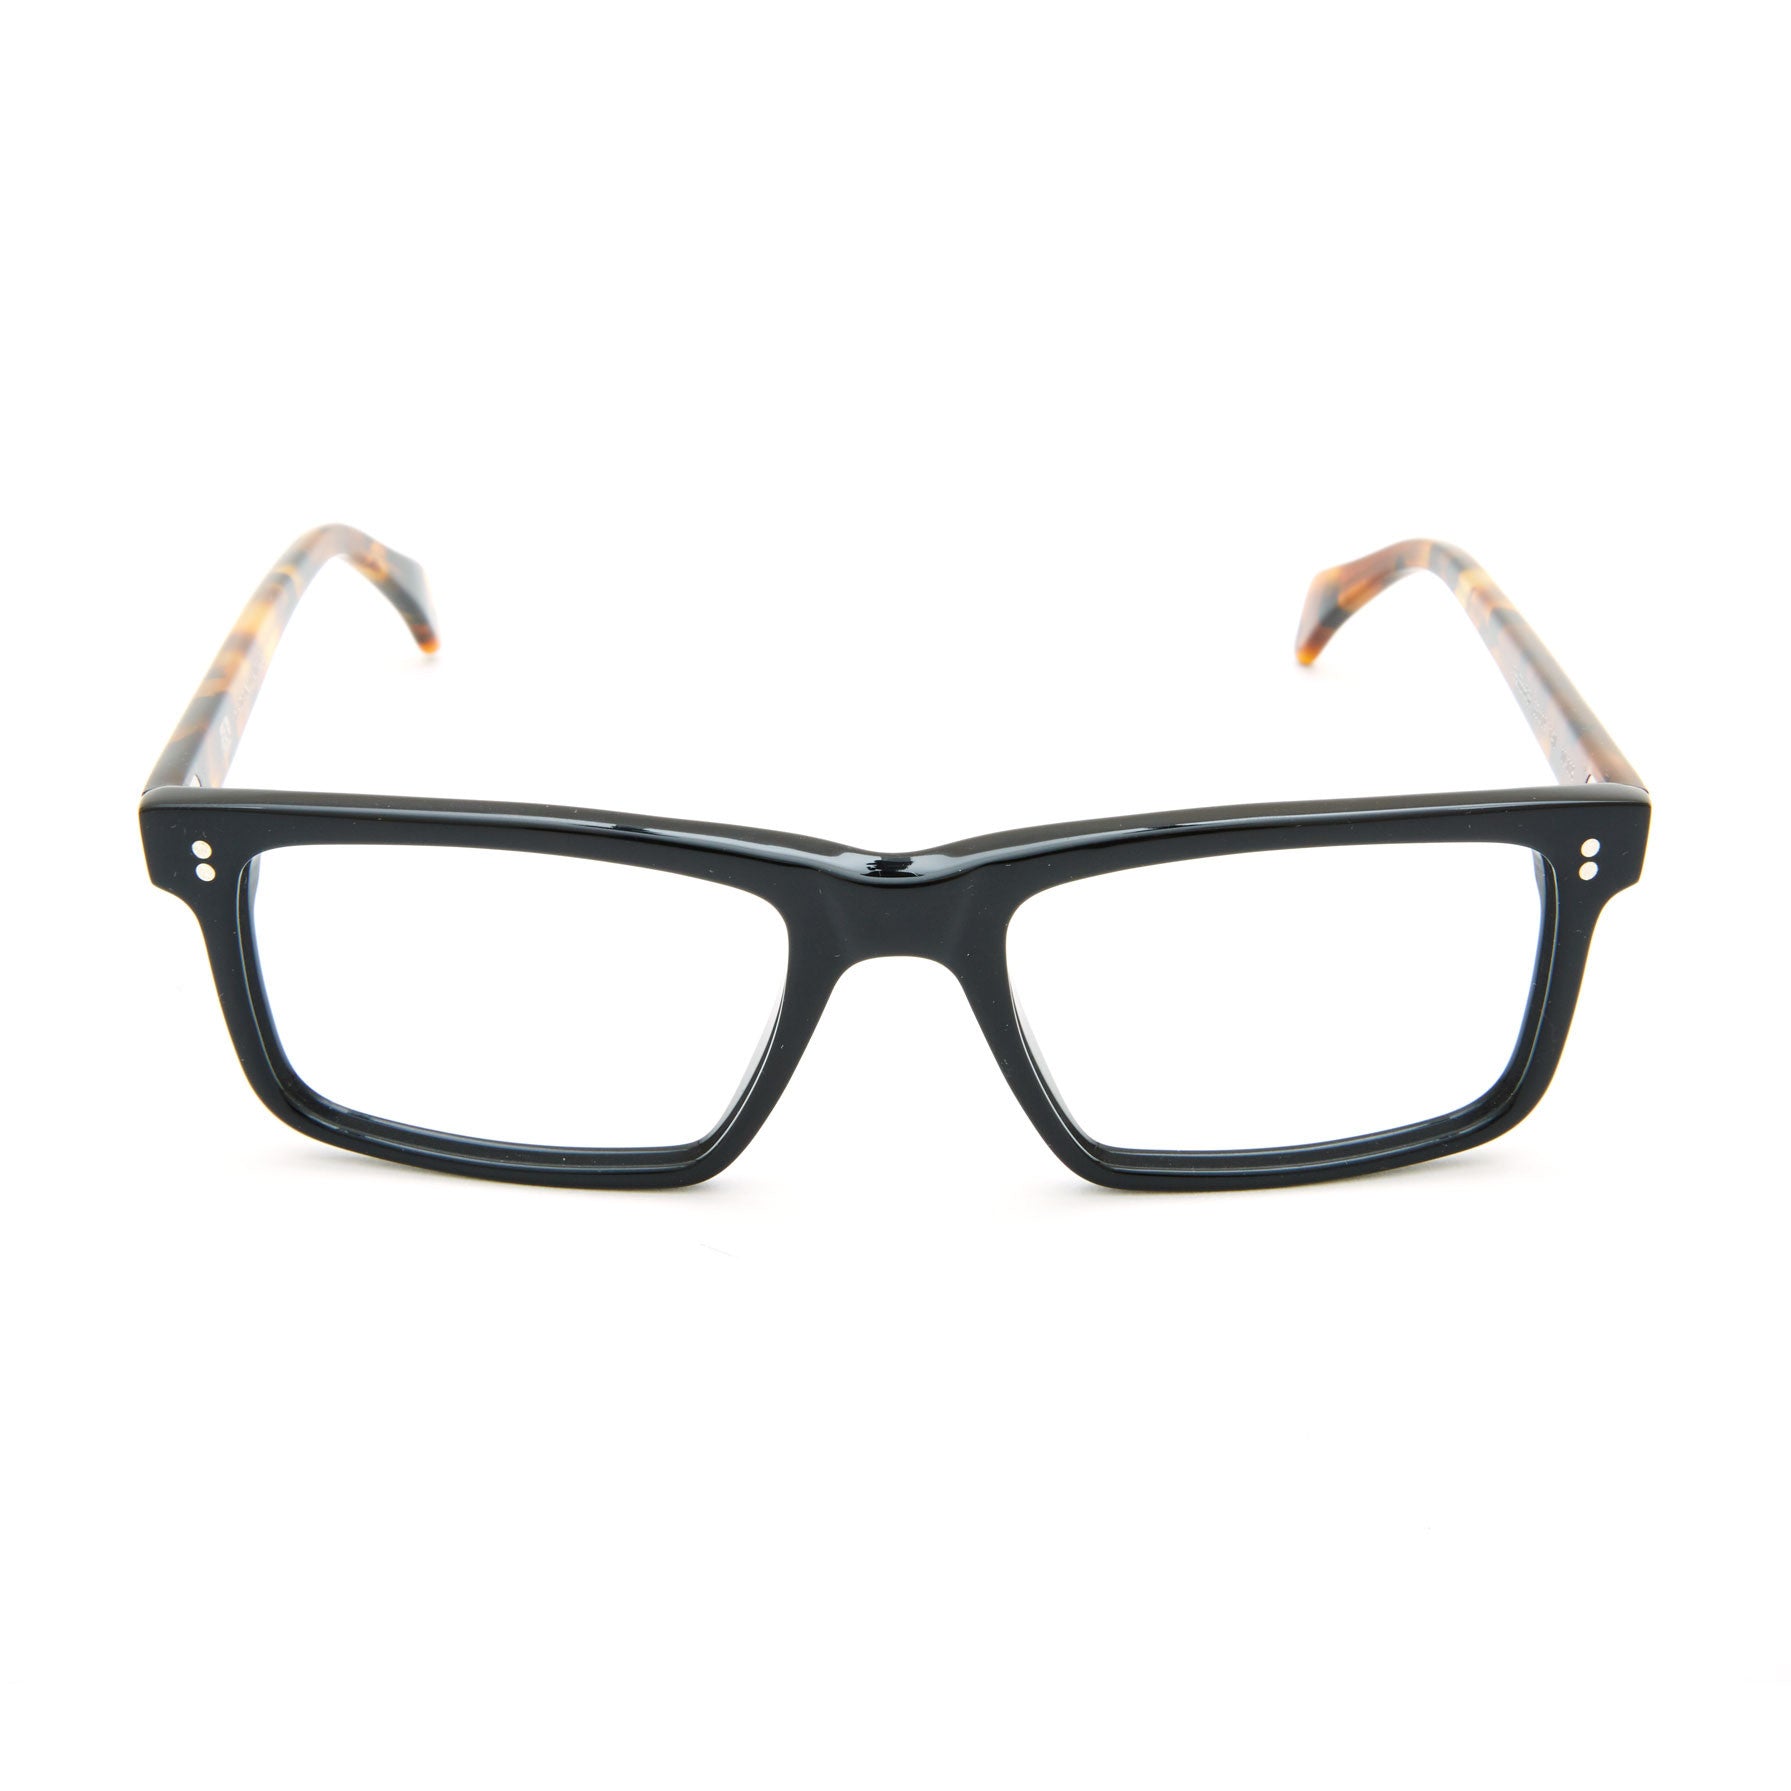 Stafford St. Black with Tort Temples